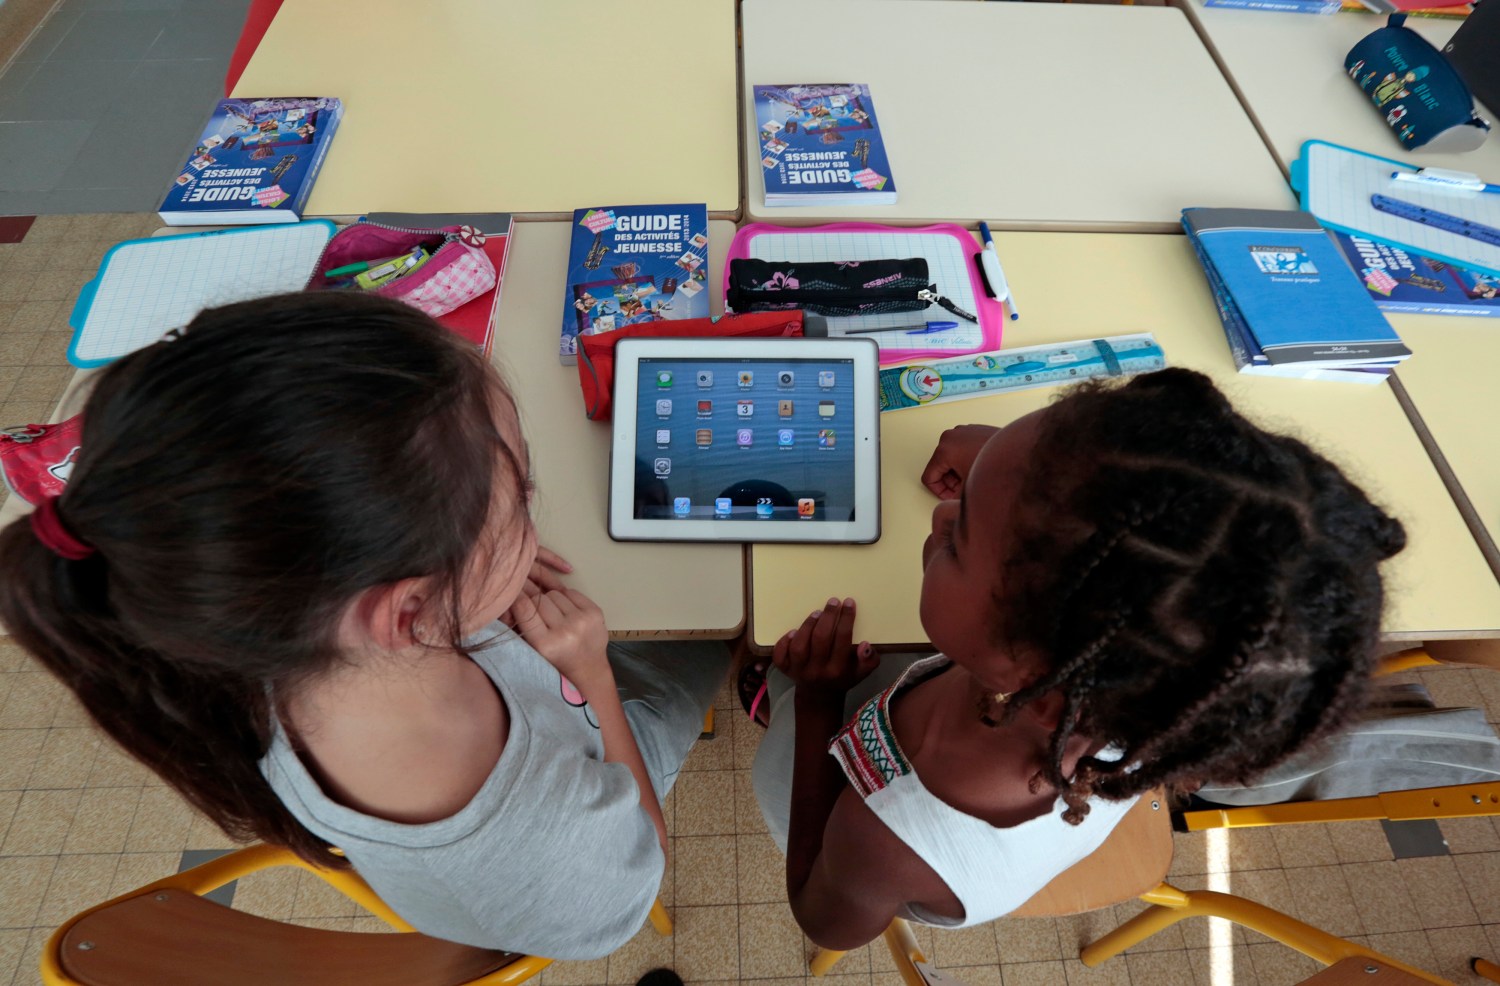 Elementary school children share an electronic tablet on the first day of class in the new school year in Nice, September 3, 2013.    REUTERS/Eric Gaillard (FRANCE - Tags: EDUCATION) - PM1E99310XV01